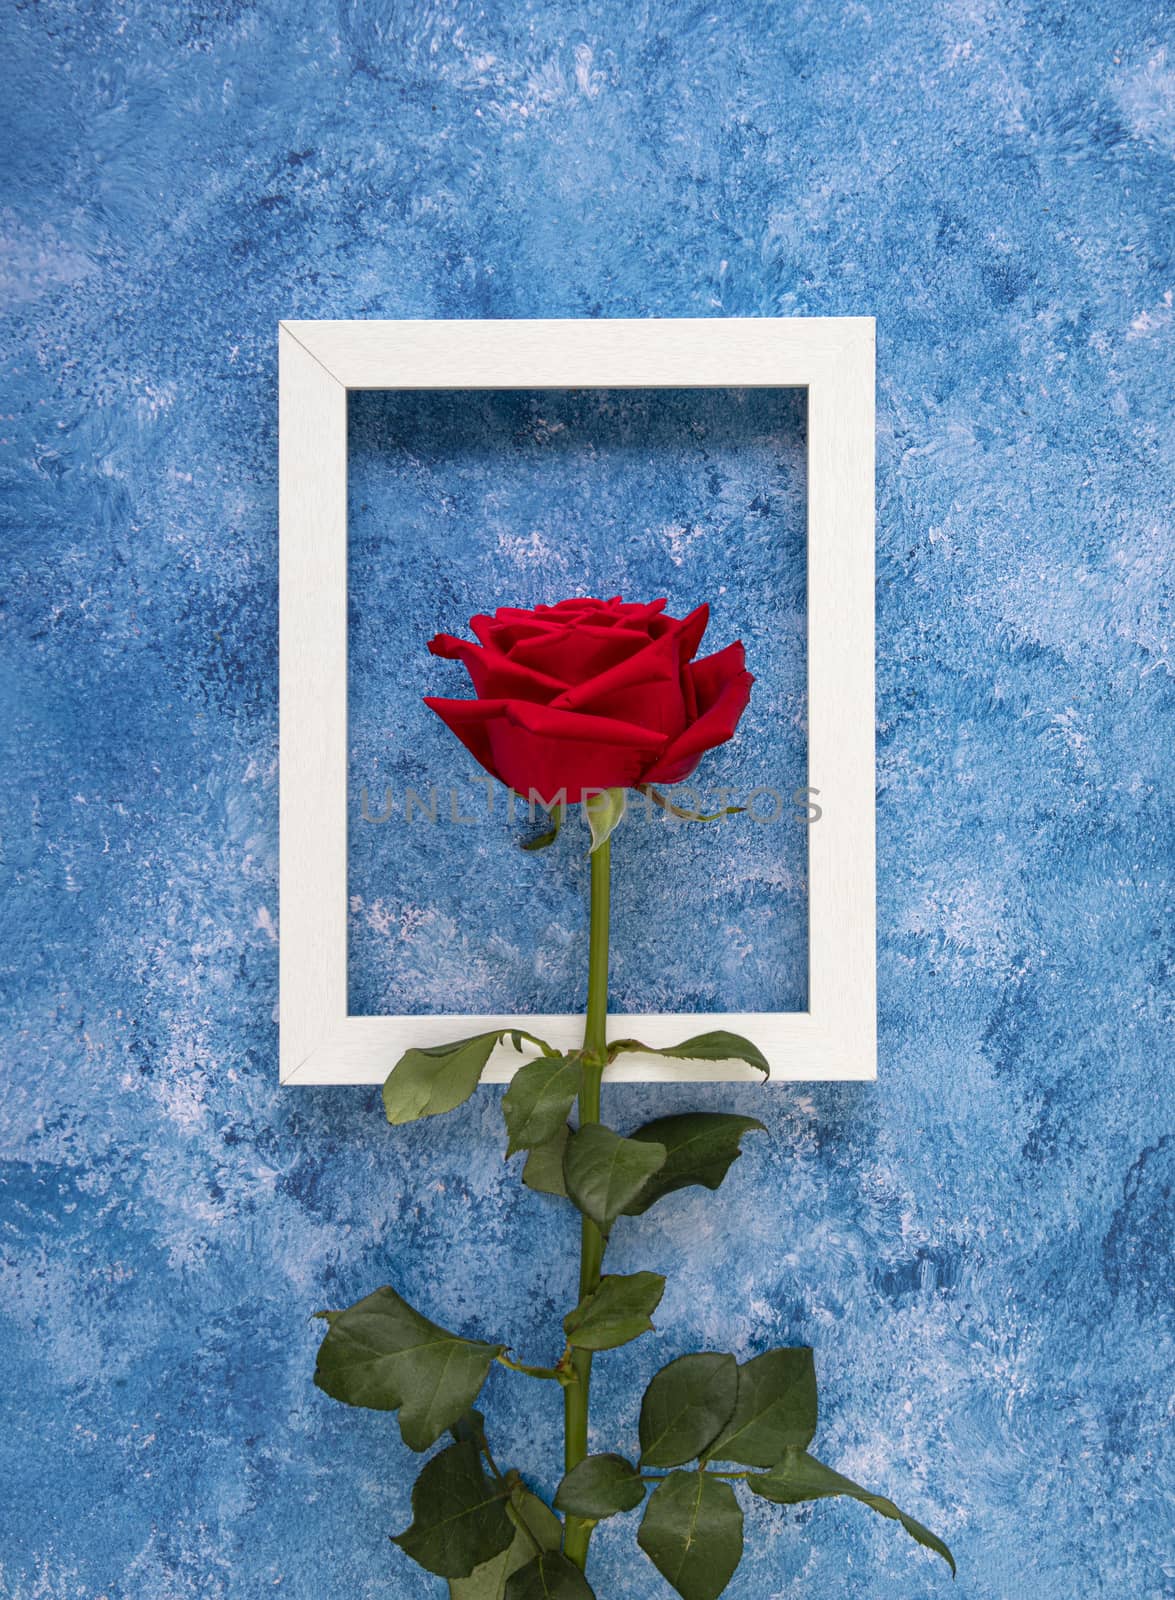 A beautiful blooming red rose in front of a white wooden frame on a blue and white acrylic paint background. Flat lay design.